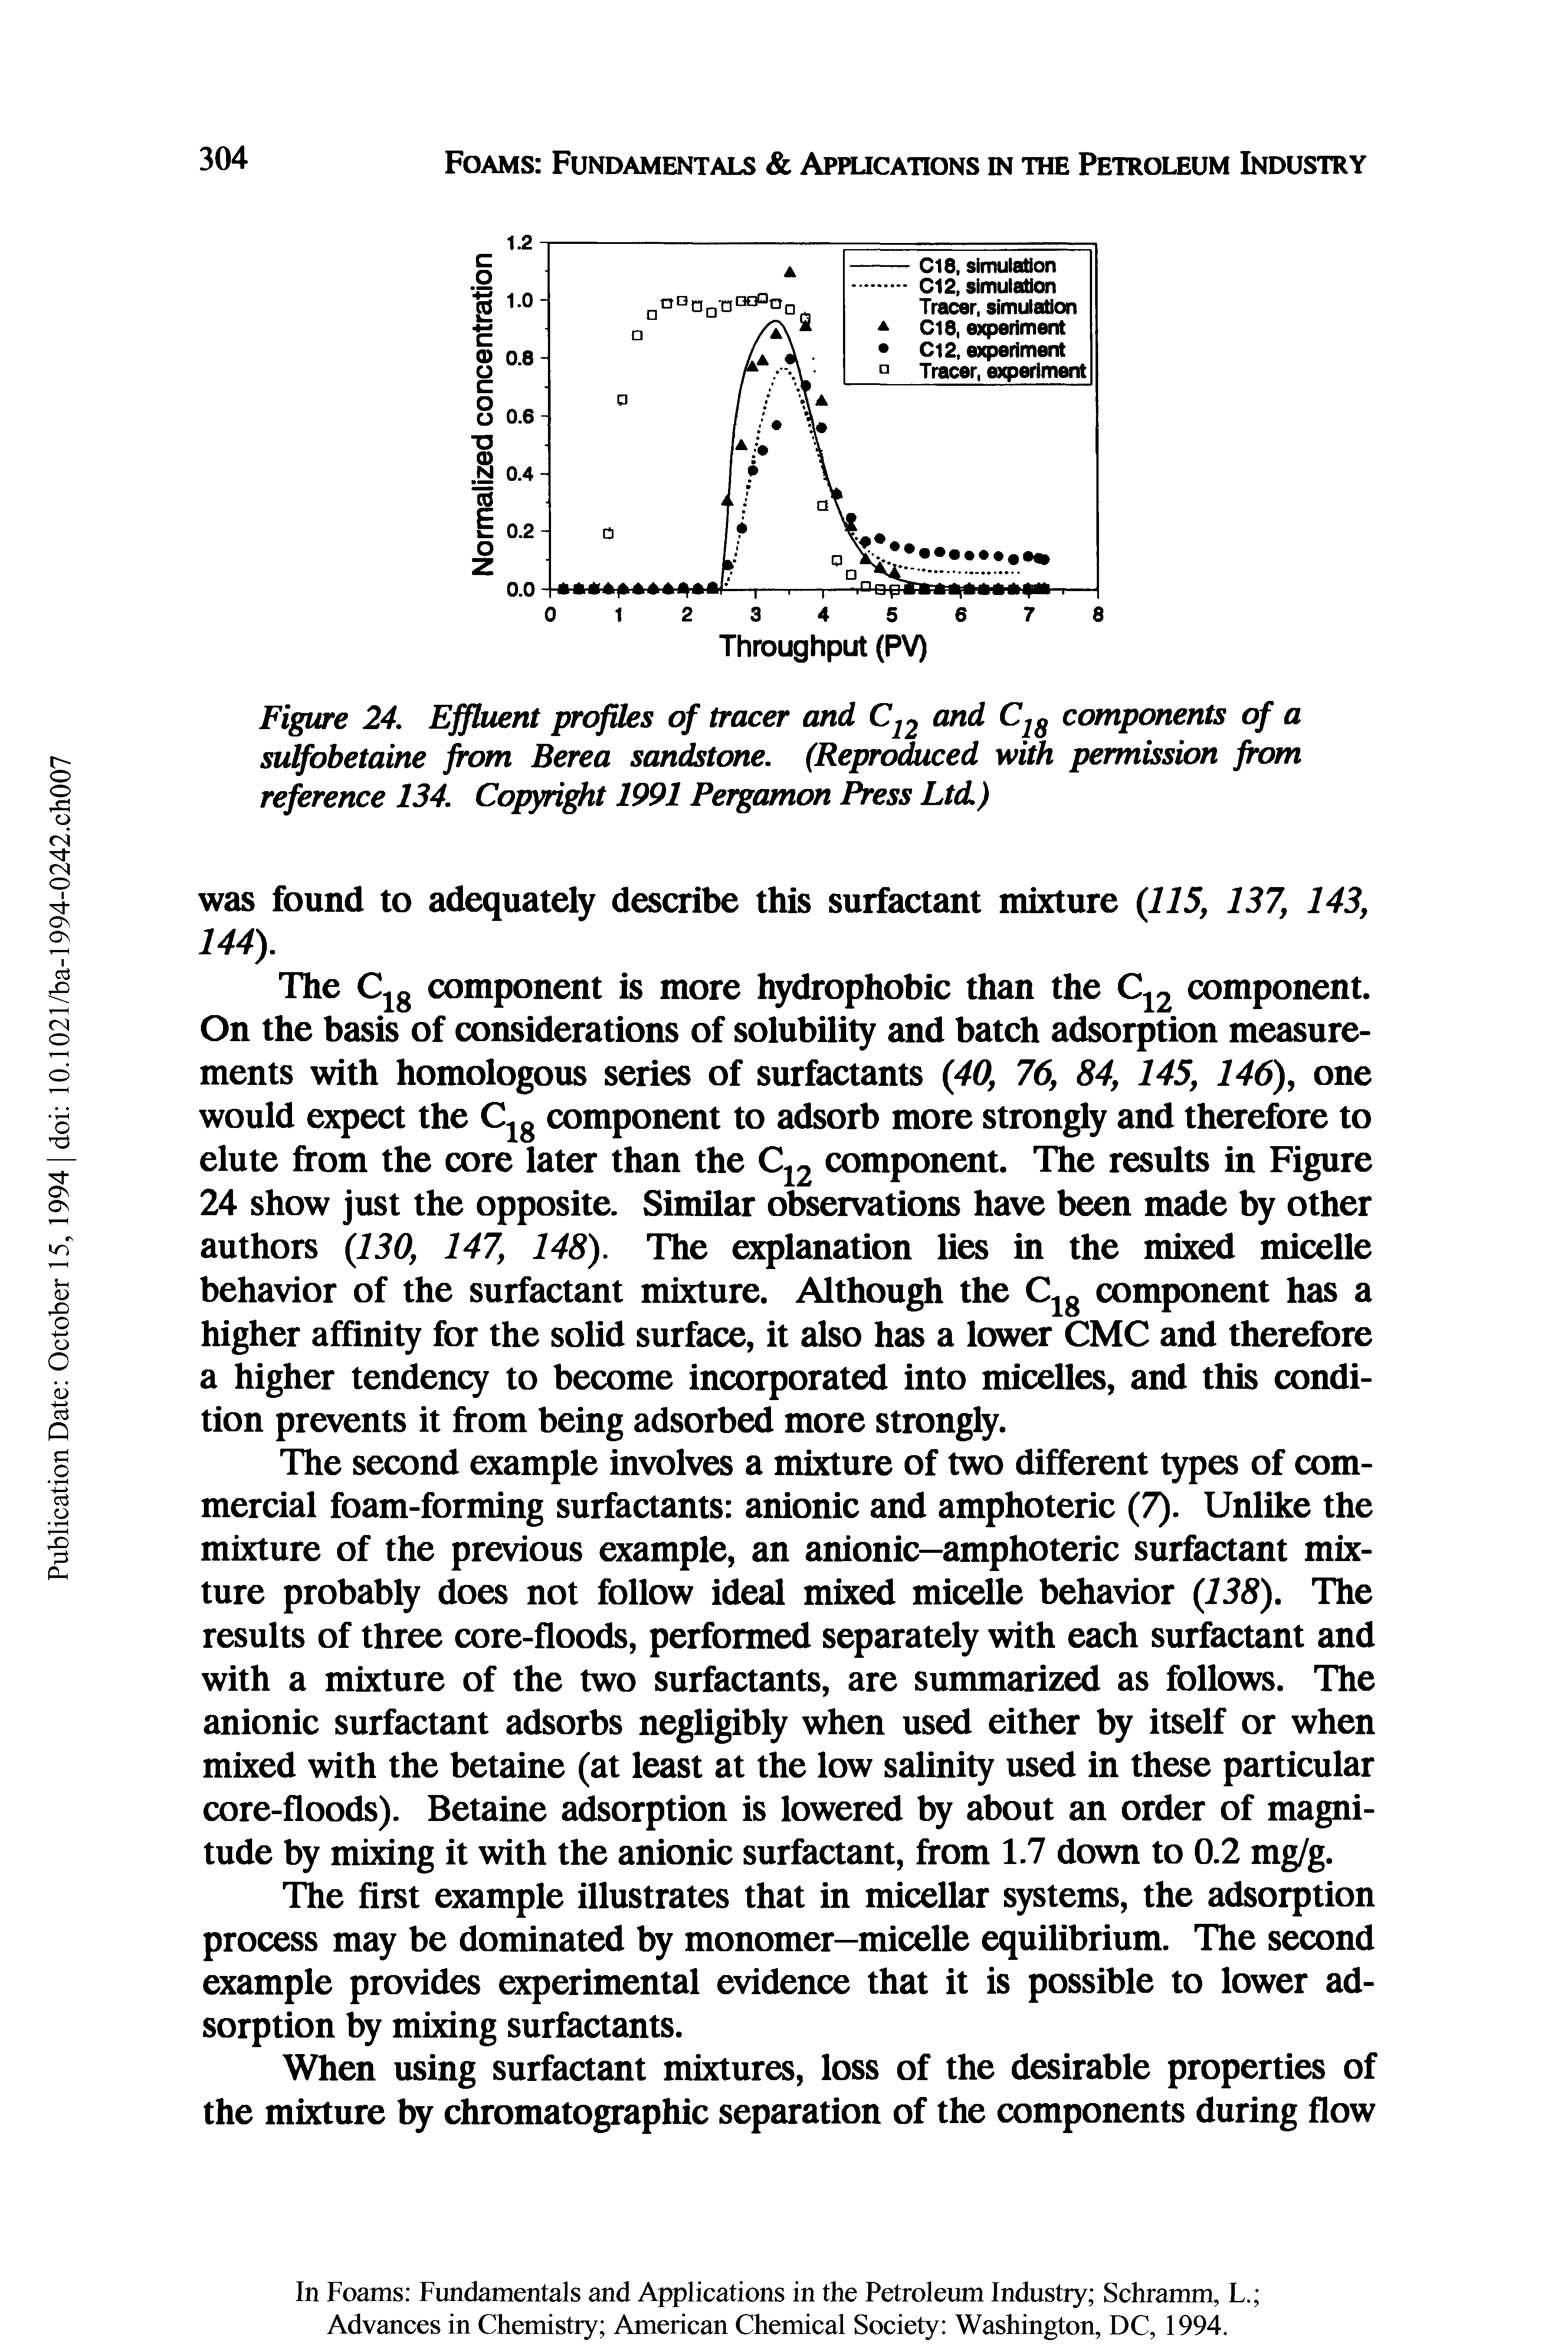 Figure 24. Effluent profiles of tracer and C12 and C18 components of a sulfobetaine from Berea sandstone. (Reproduced with permission from reference 134. Copyright 1991 Pergamon Press Ltd.)...